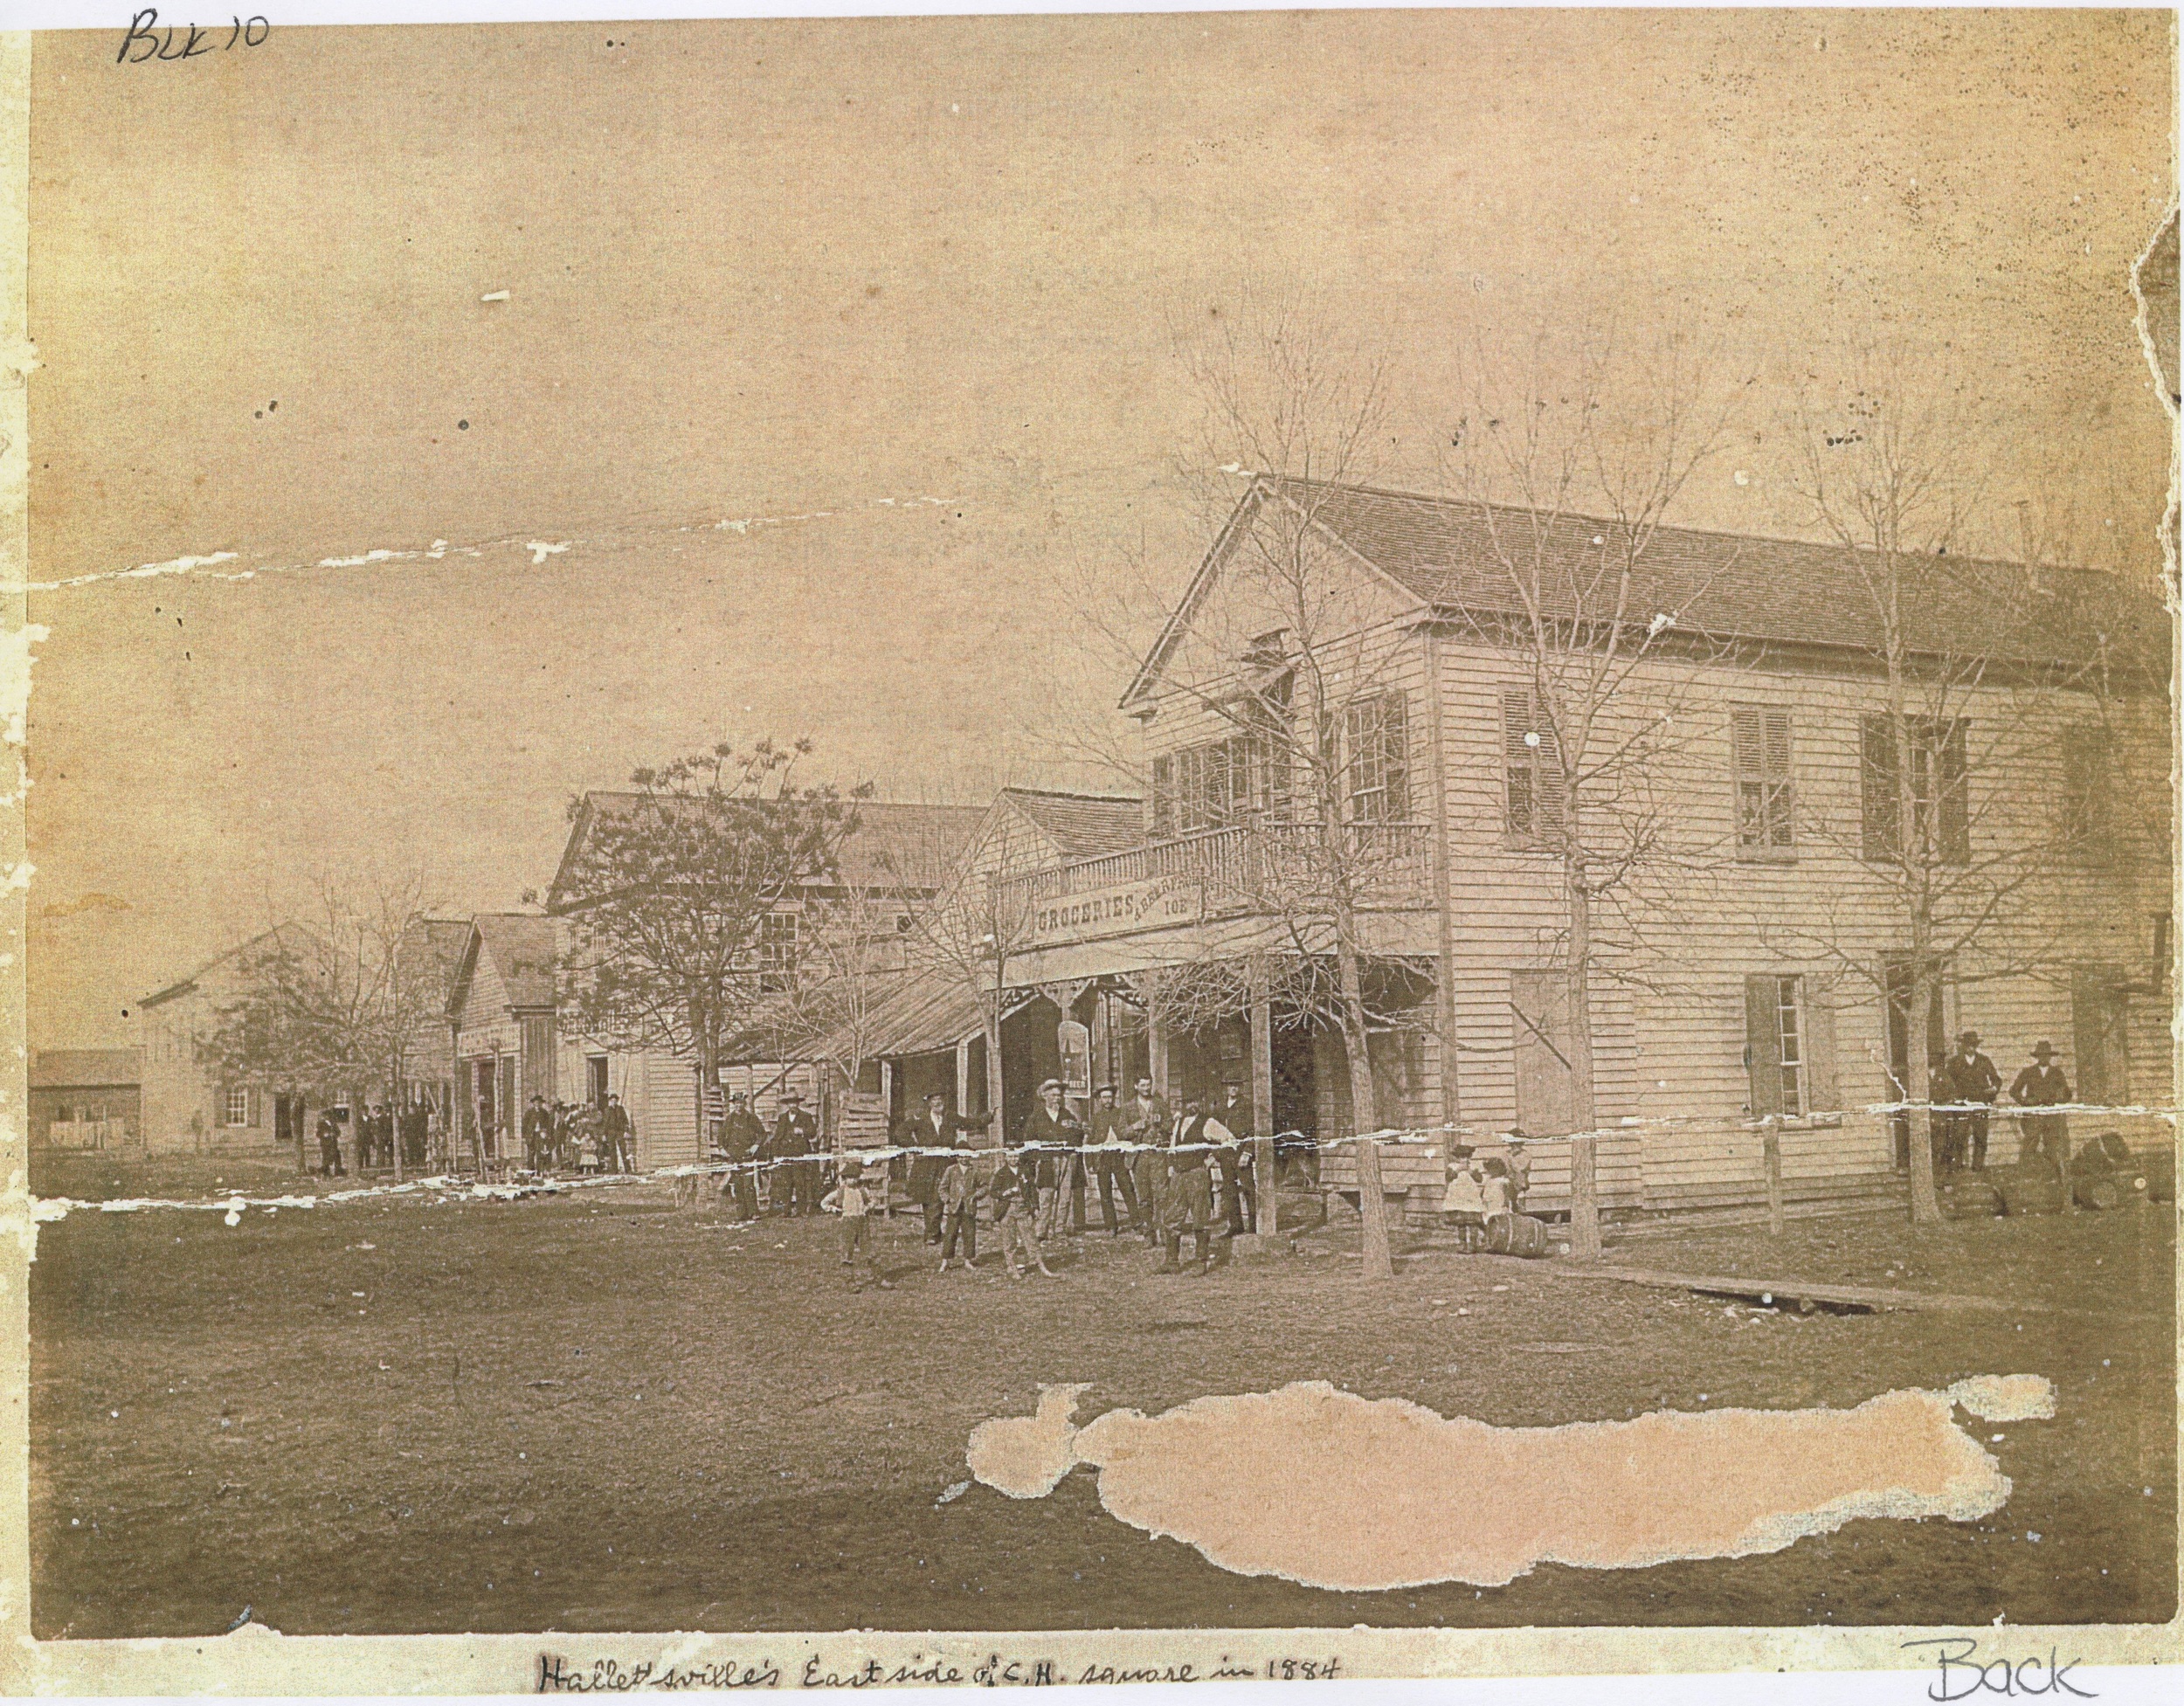 East side of Hallettsville square, 1884